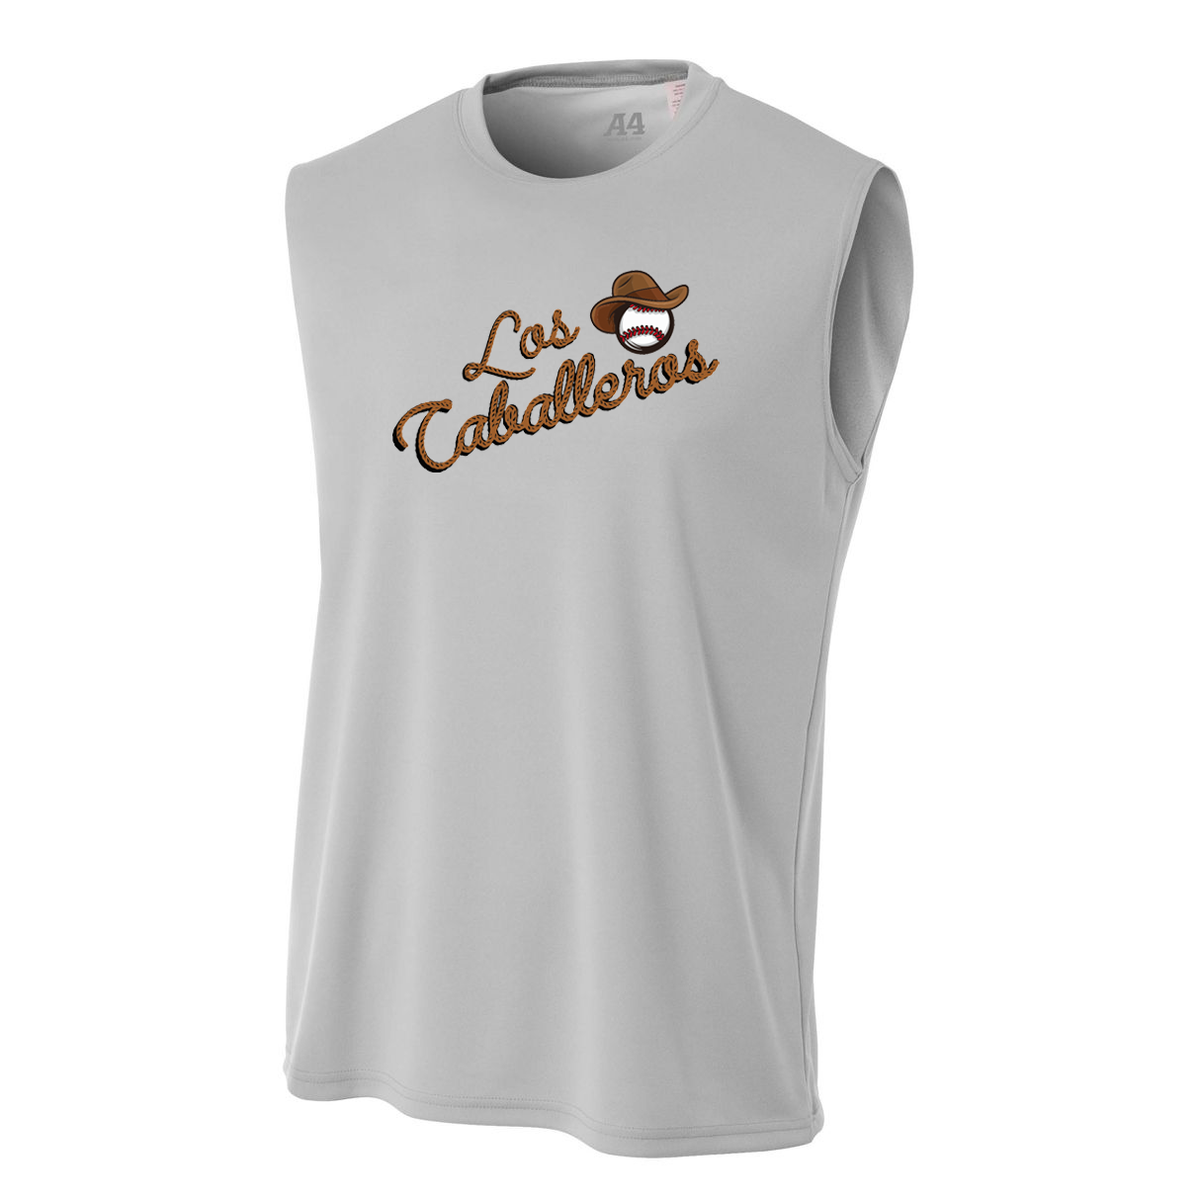 Caballeros Baseball Cooling Performance Muscle Tank